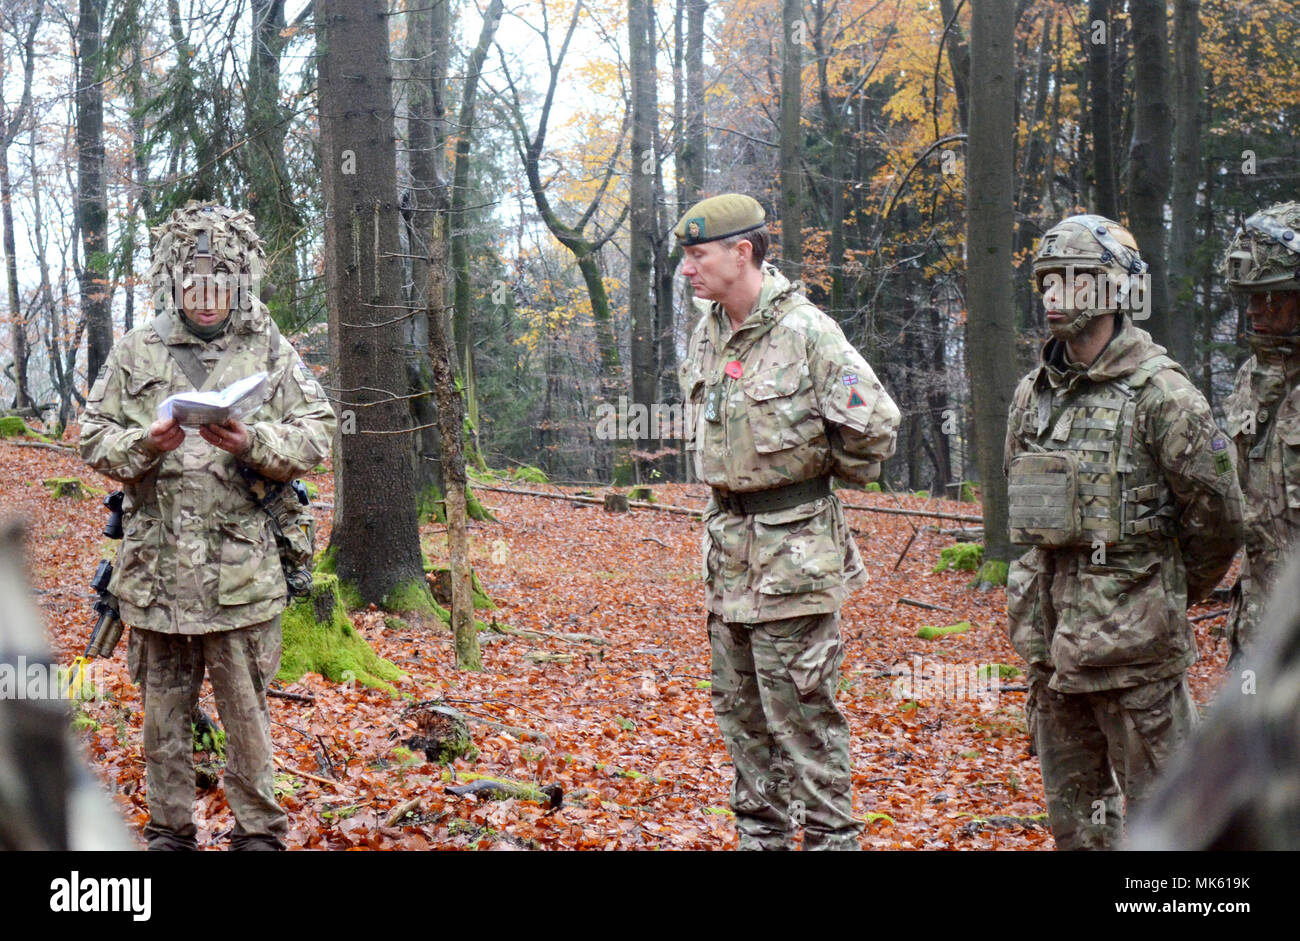 Despite the weather, British soldiers with the 1st Battalion, Royal Regiment of the Fusiliers take a moment for an impromptu Armistice Remembrance Ceremony during their training at the U.S. Army's Joint Multinational Readiness Center in Hohenfels, Germany, as they participate in Allied Spirit VII, 12 Nov. 2017. Approximately 4,050 service members from 13 nations are participating in exercise Allied Spirit VII at 7th Army Training Command’s Hohenfels Training Area, Germany, Oct. 30 to Nov. 22, 2017. Allied Spirit is a U.S. Army Europe-directed, 7ATC-conducted multinational exercise series desig Stock Photo